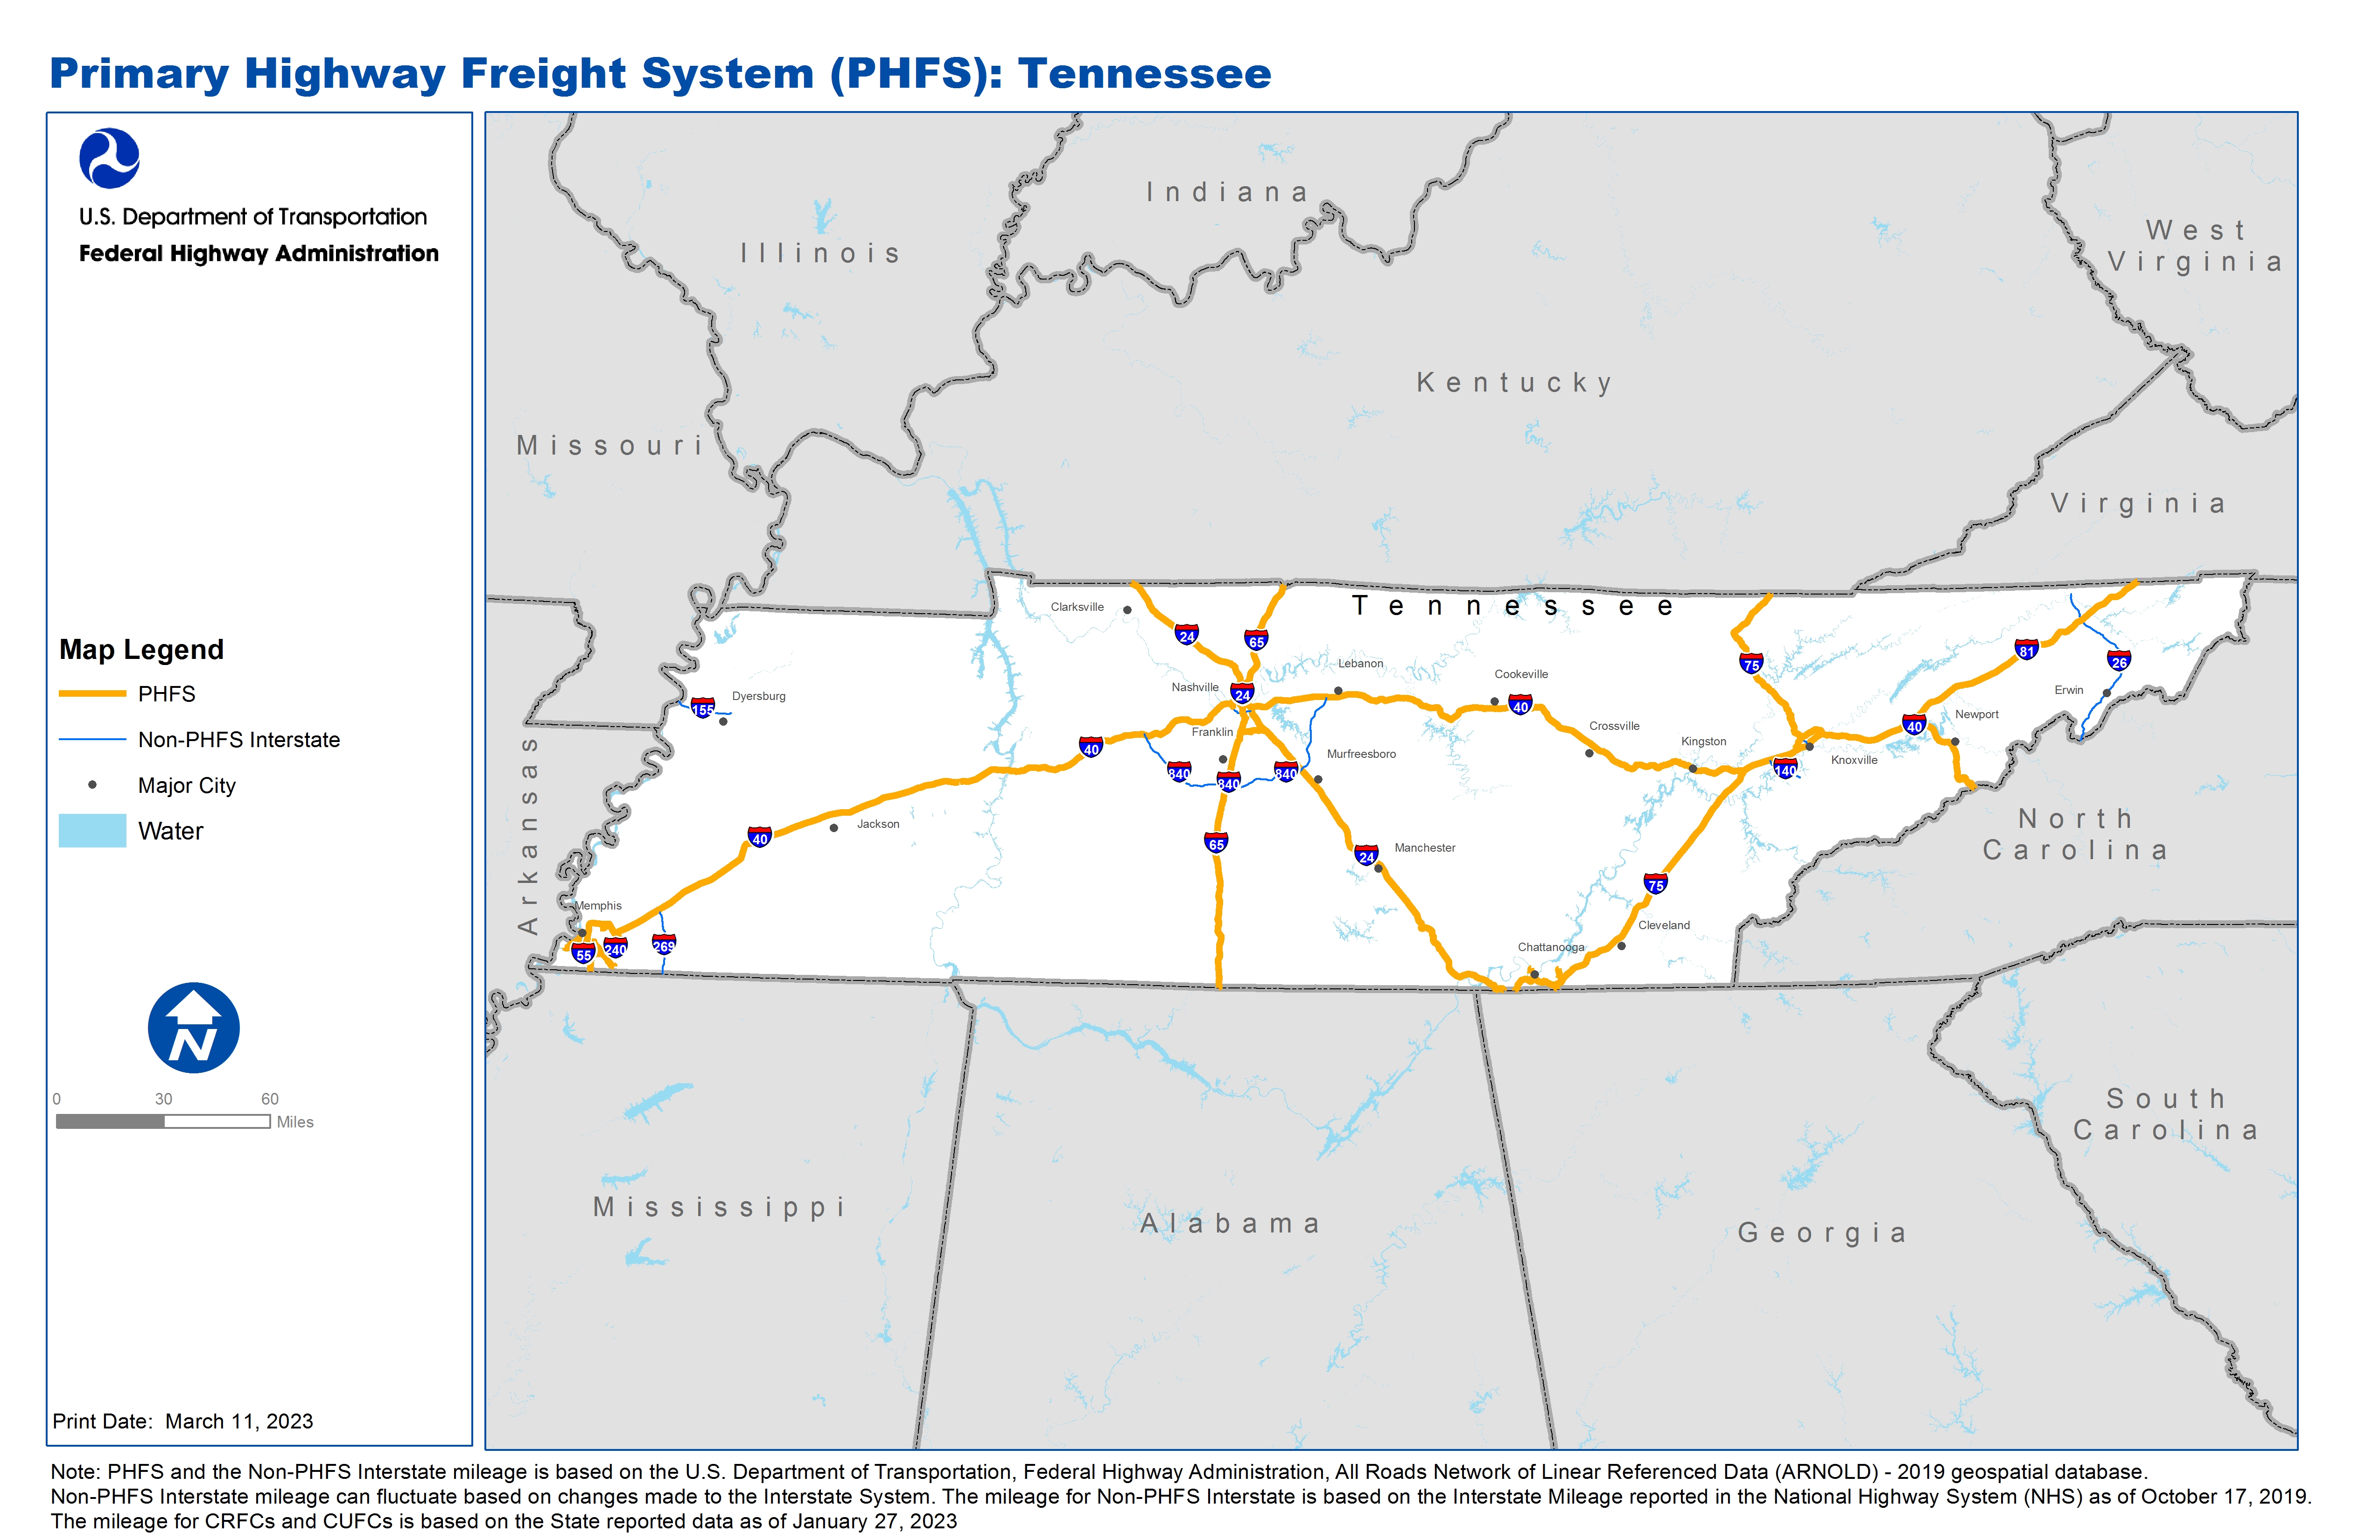 This map shows the Primary Highway Freight System (PHFS) routes as well as all the Interstate Highways within the state that are not part of the PHFS, as designated on 12/22/2022.